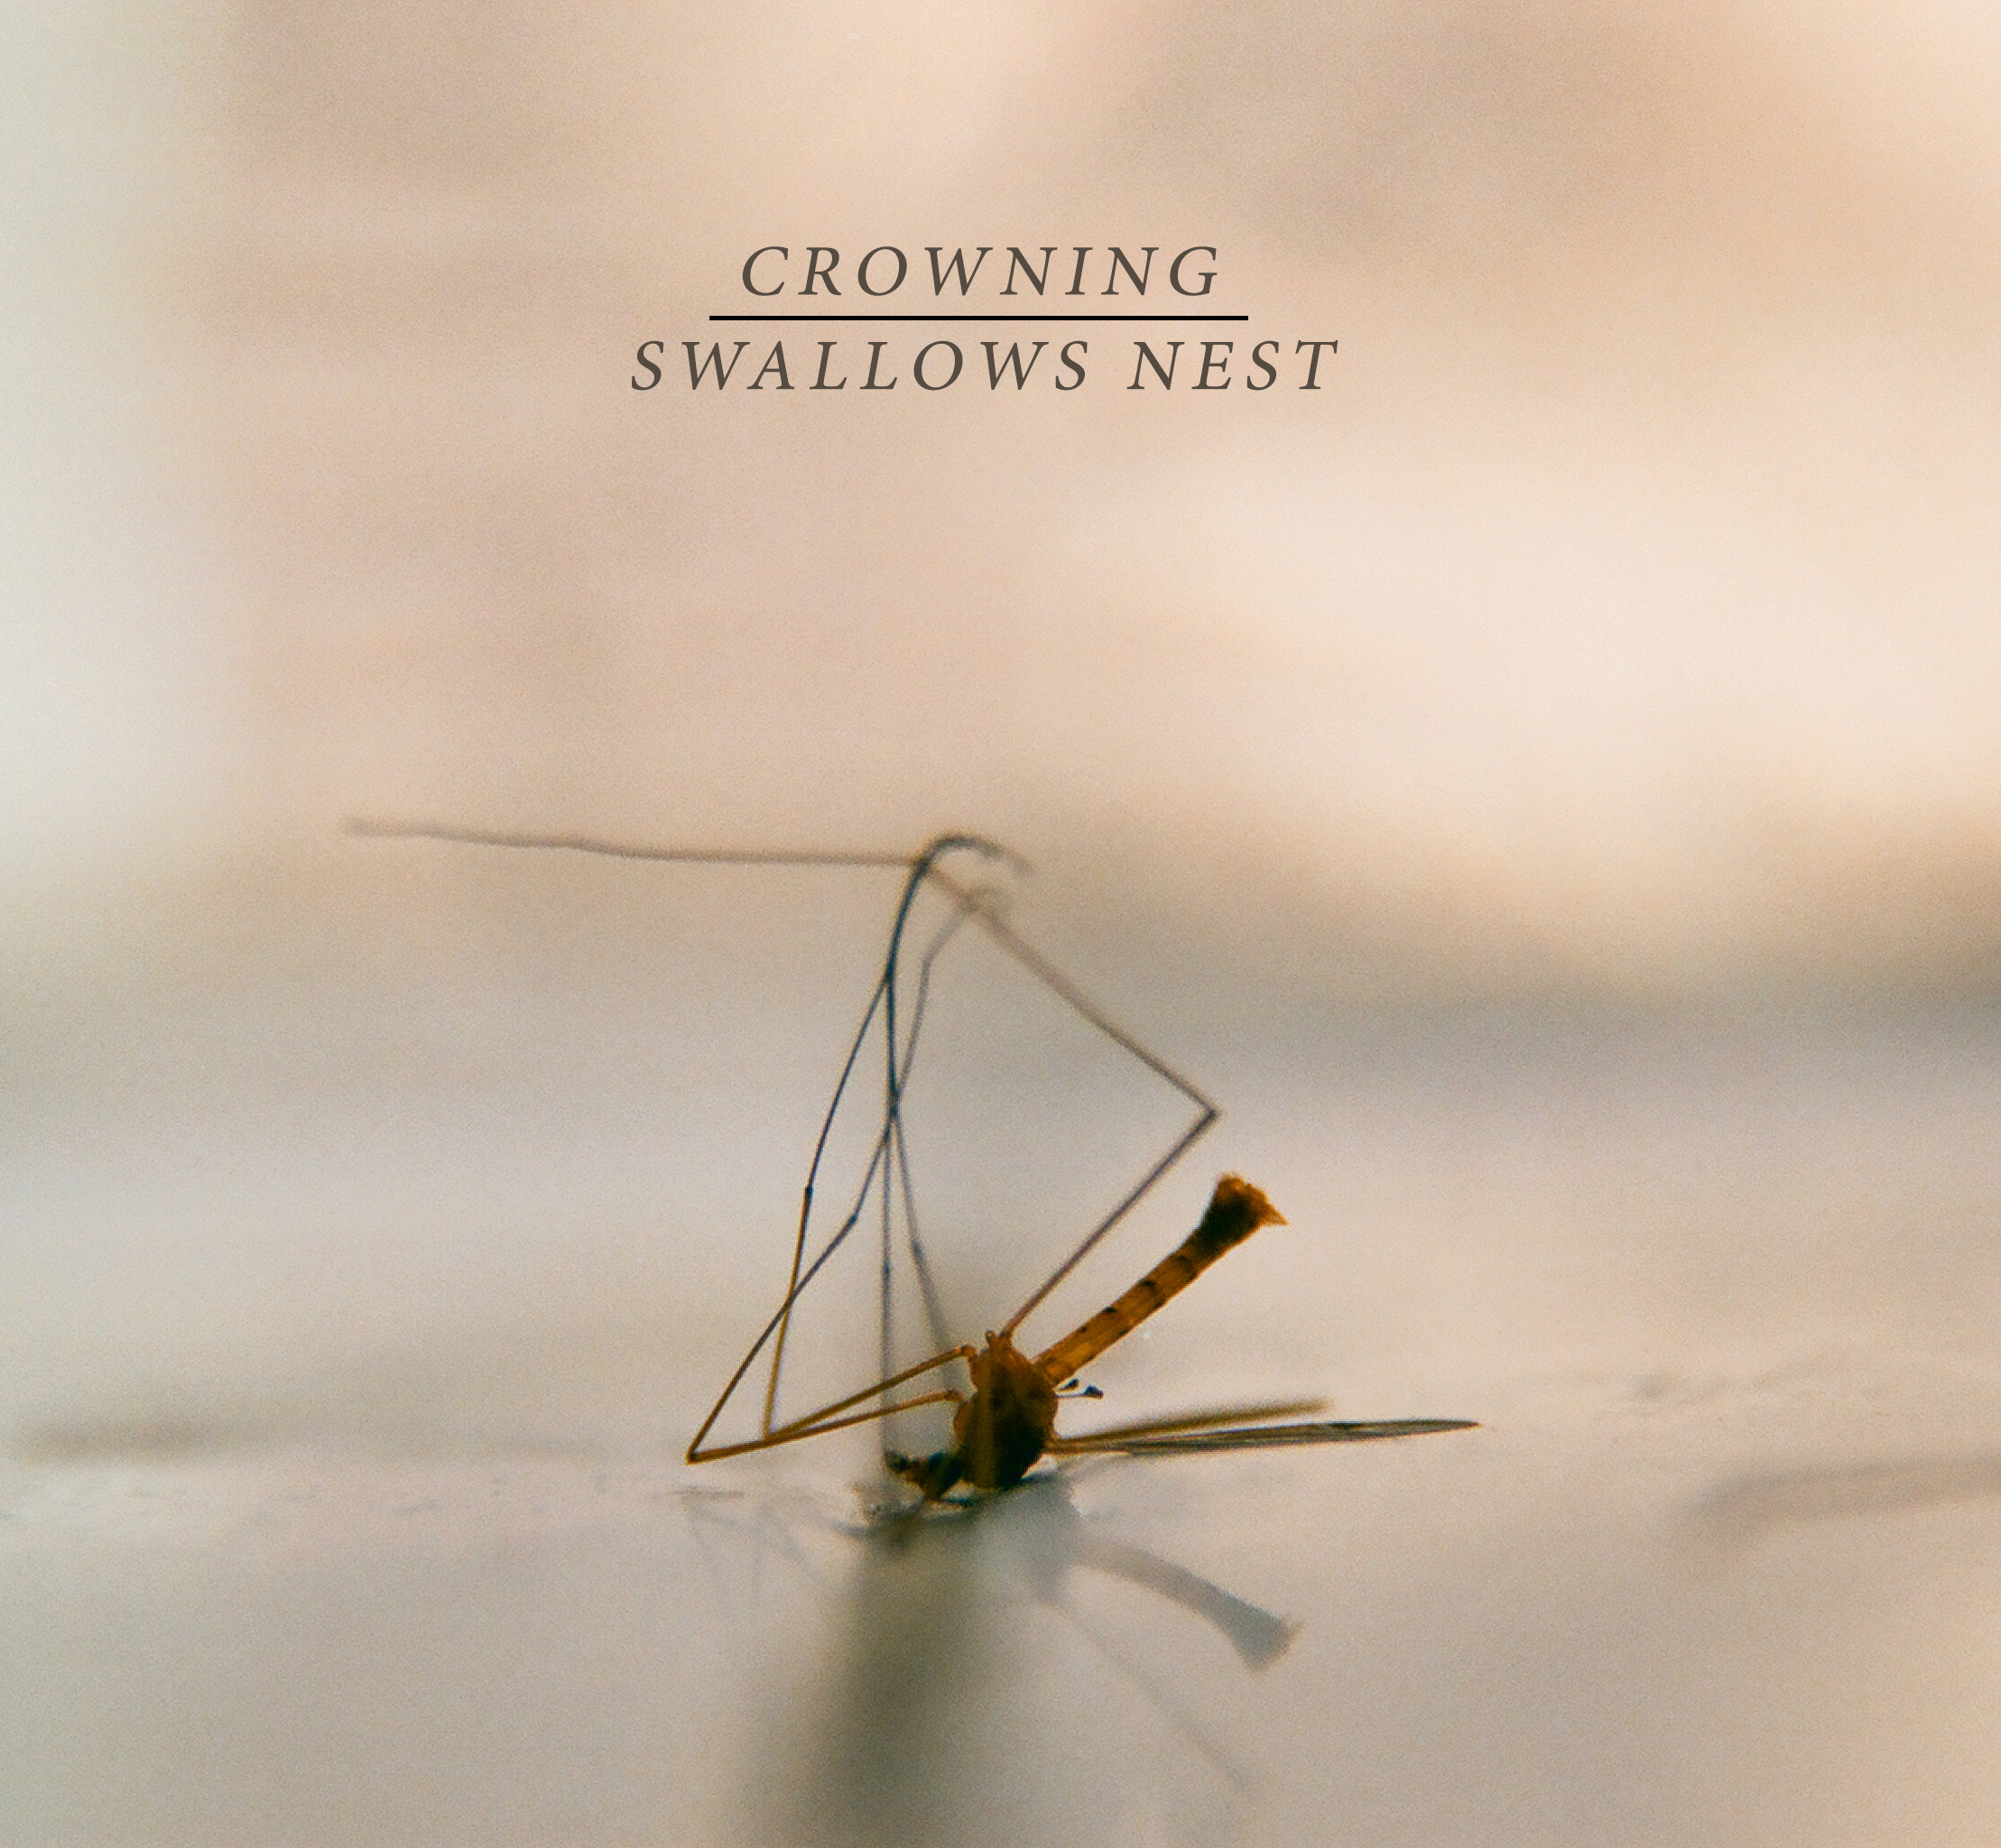 Crowning / Swallows Nest - split 7" -SOLD OUT